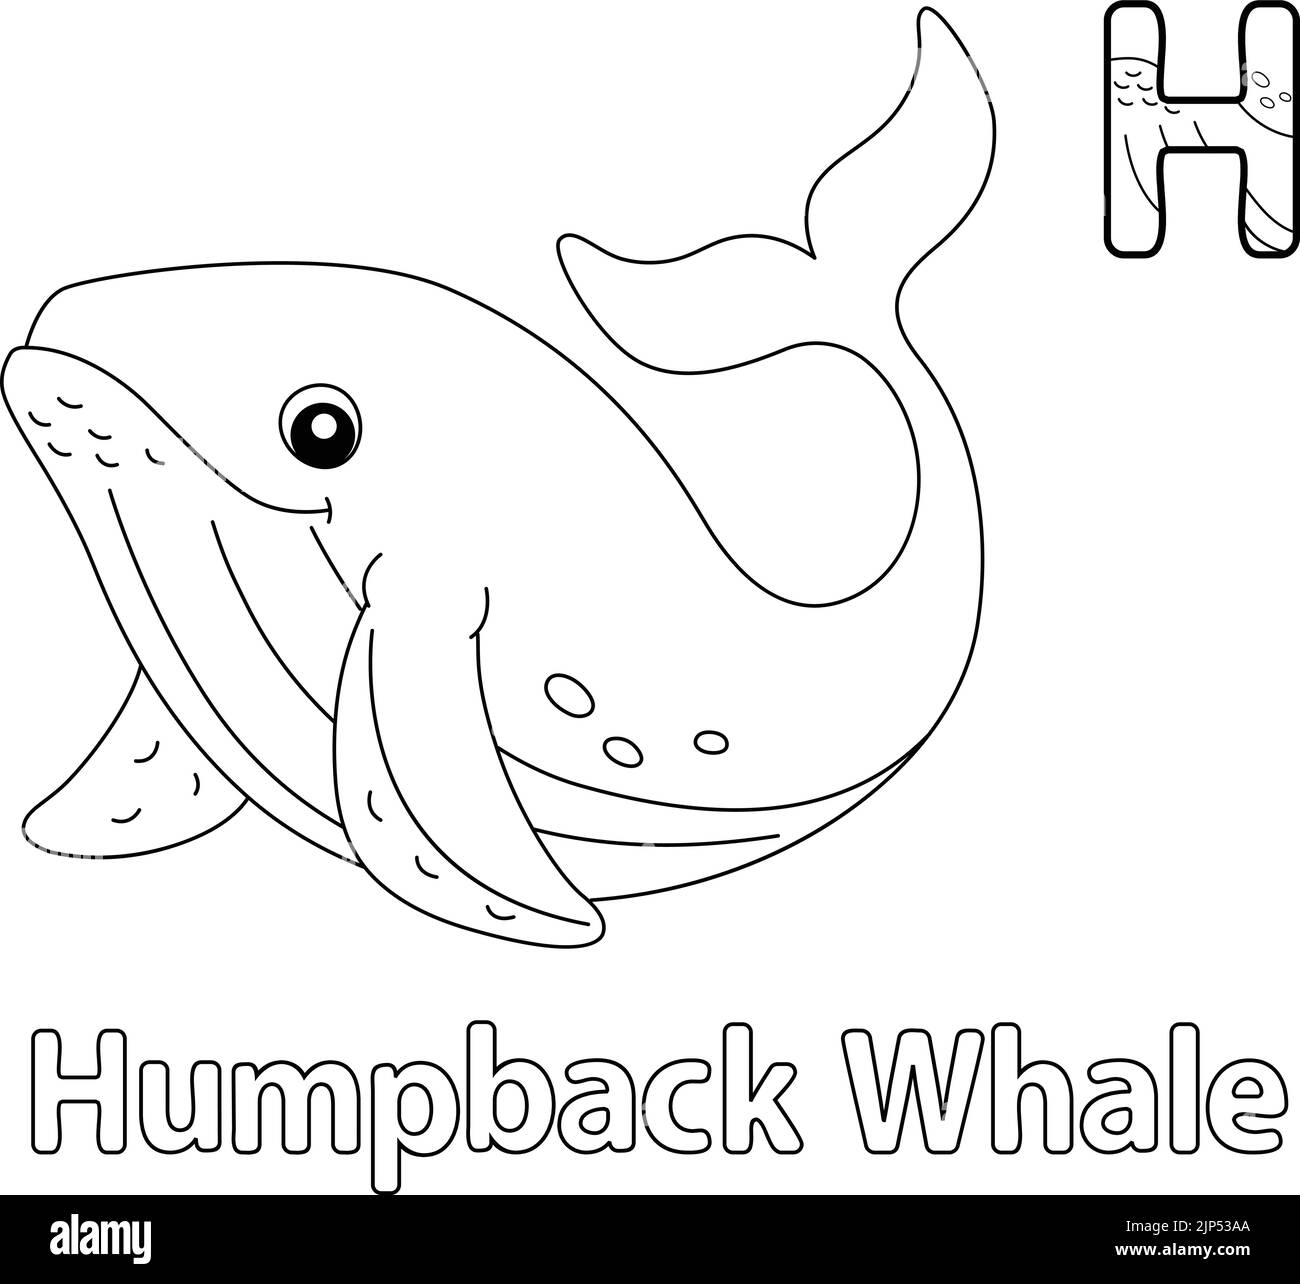 Humpback Whale Alphabet ABC Coloring Page H Stock Vector